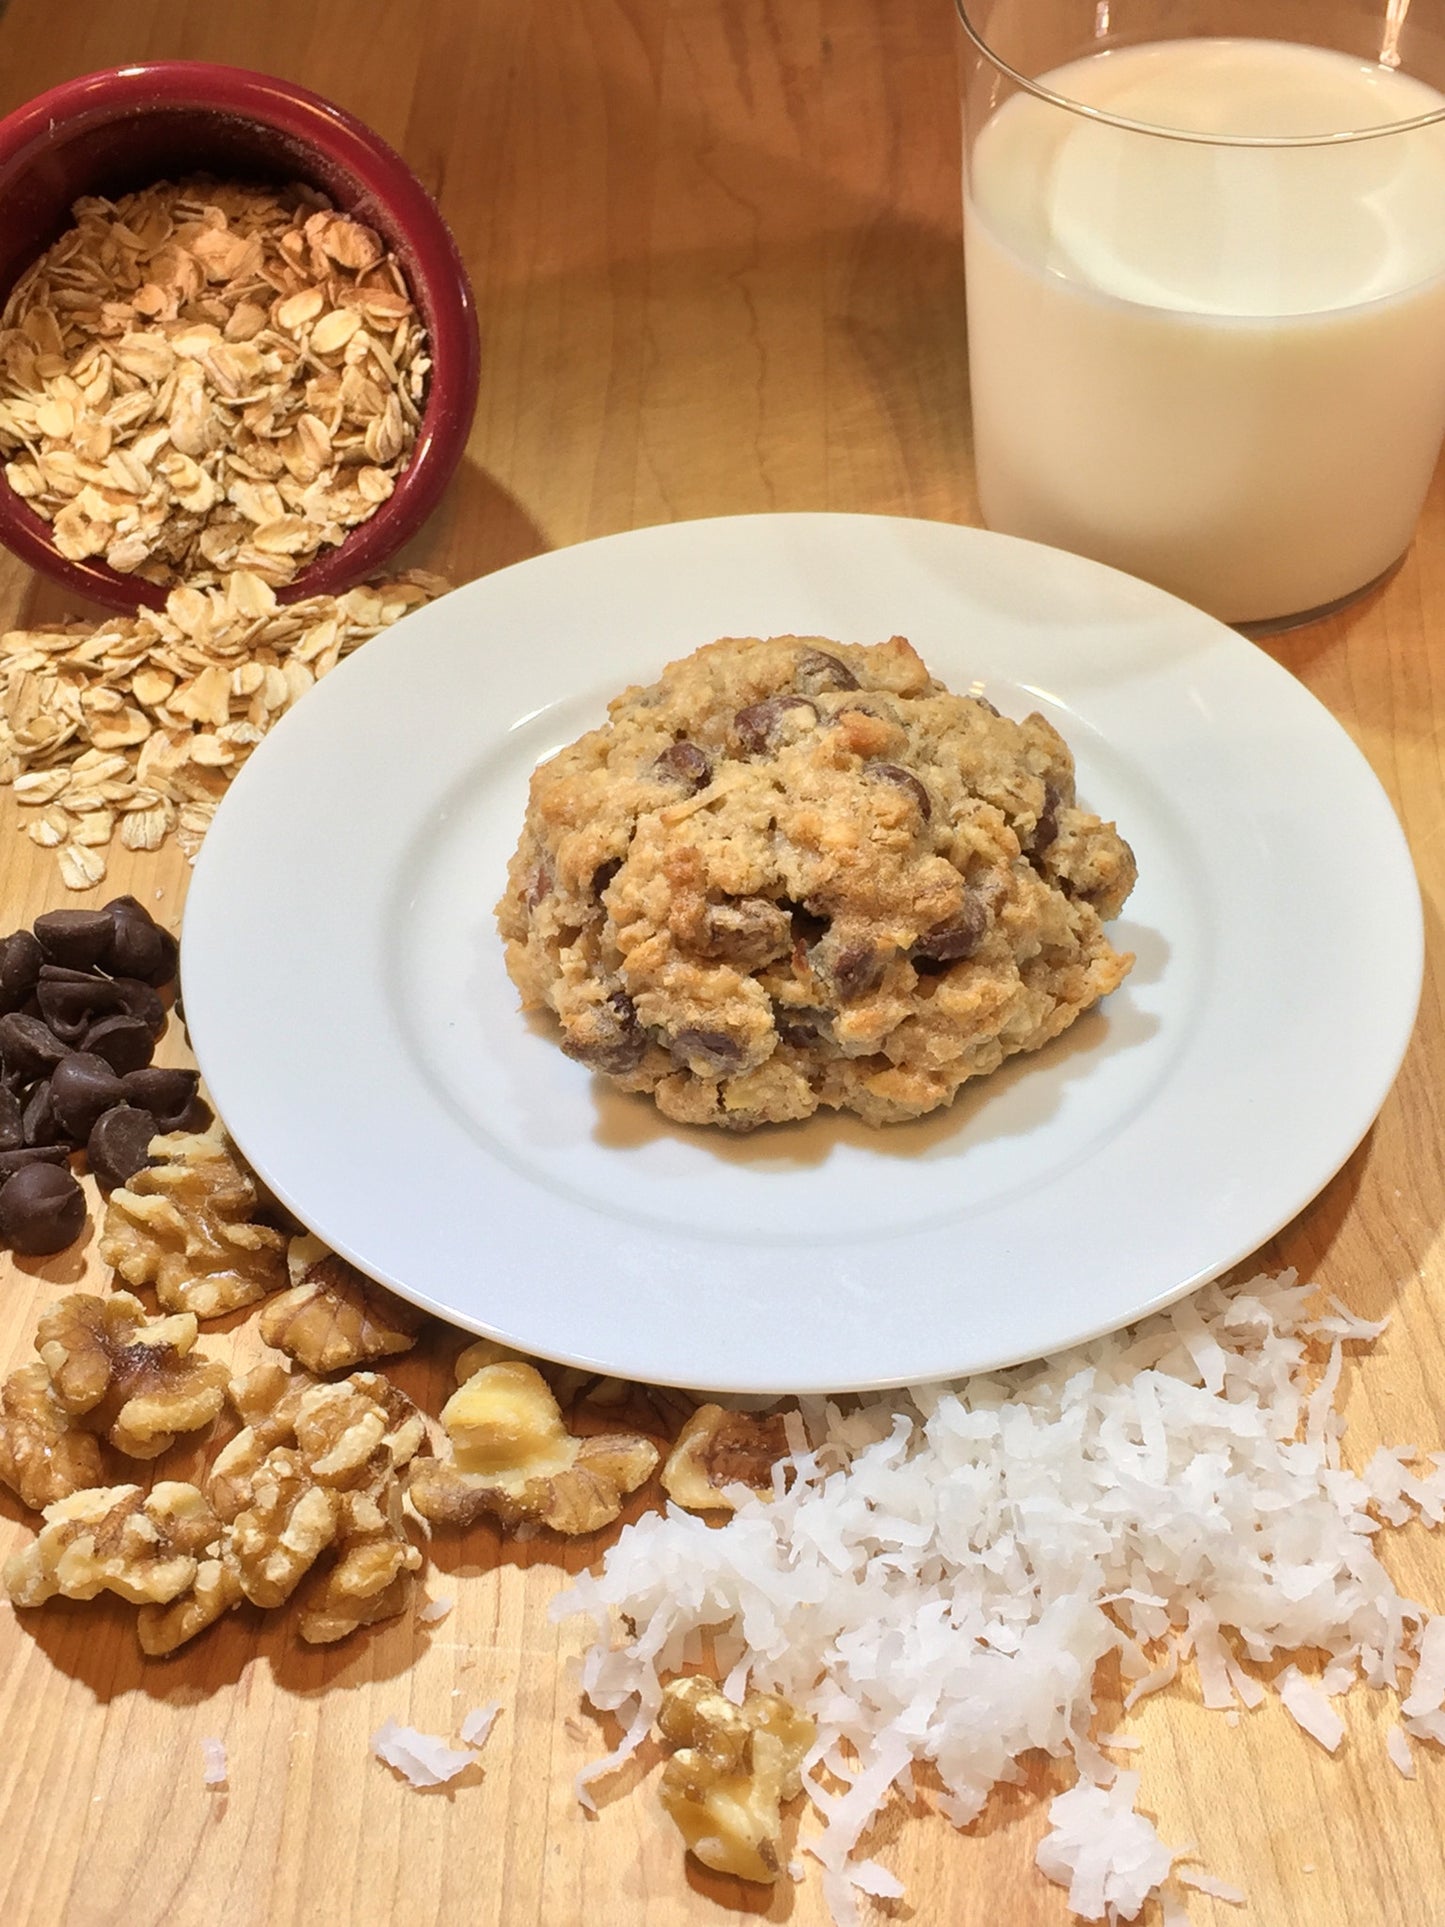 Oatmeal with Chocolate Chips, Walnuts and Coconut